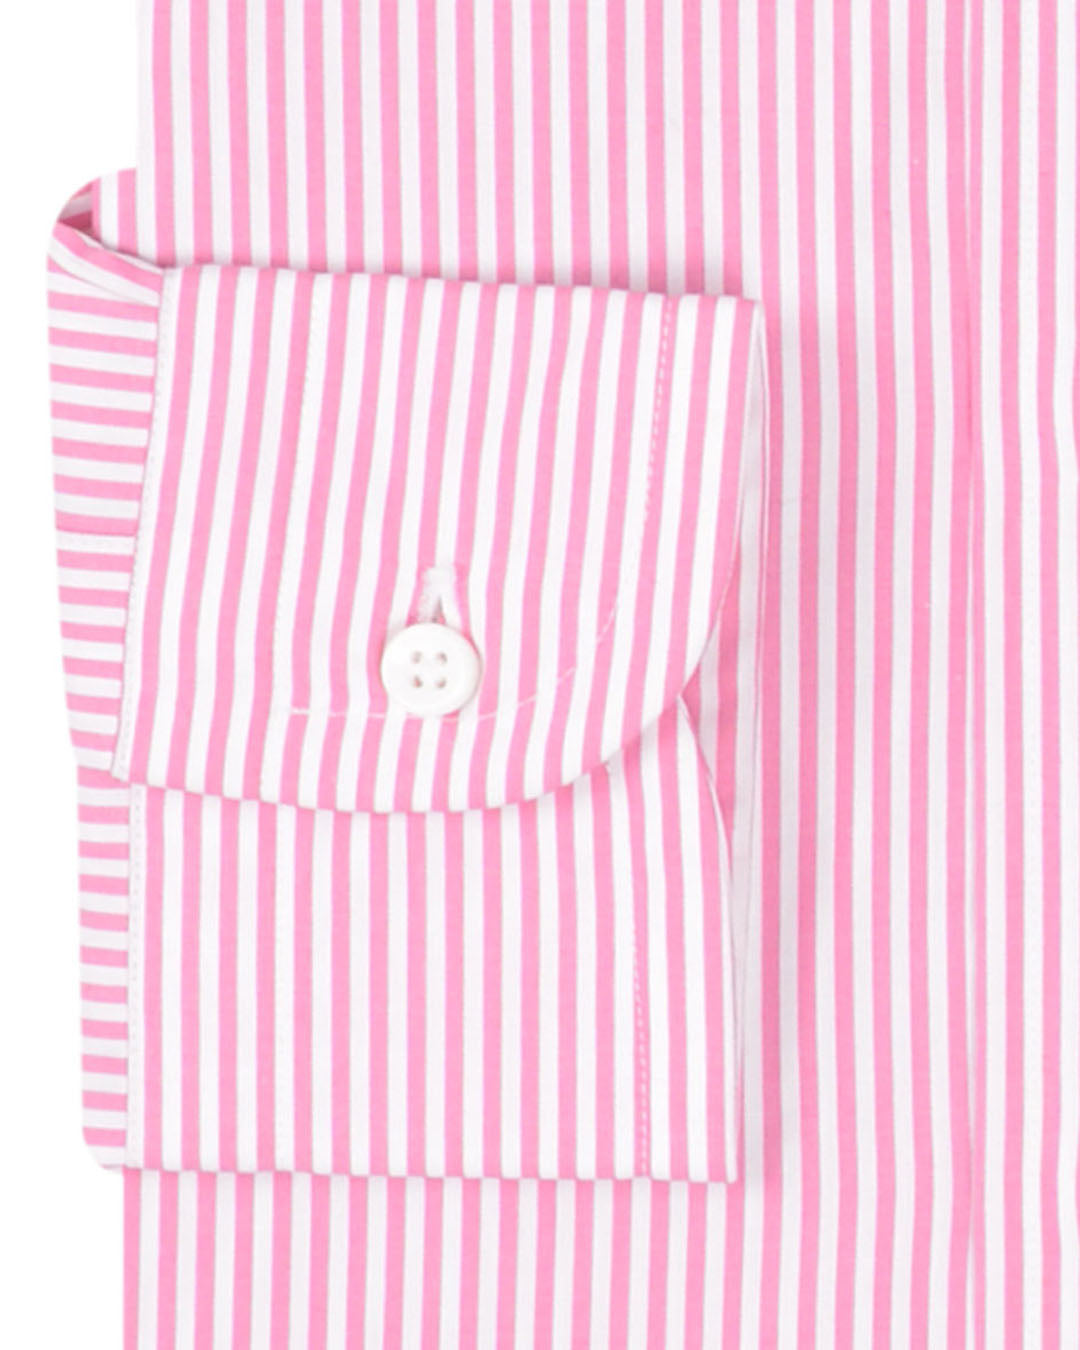 Rosewine Pink Pencil Stripes on White